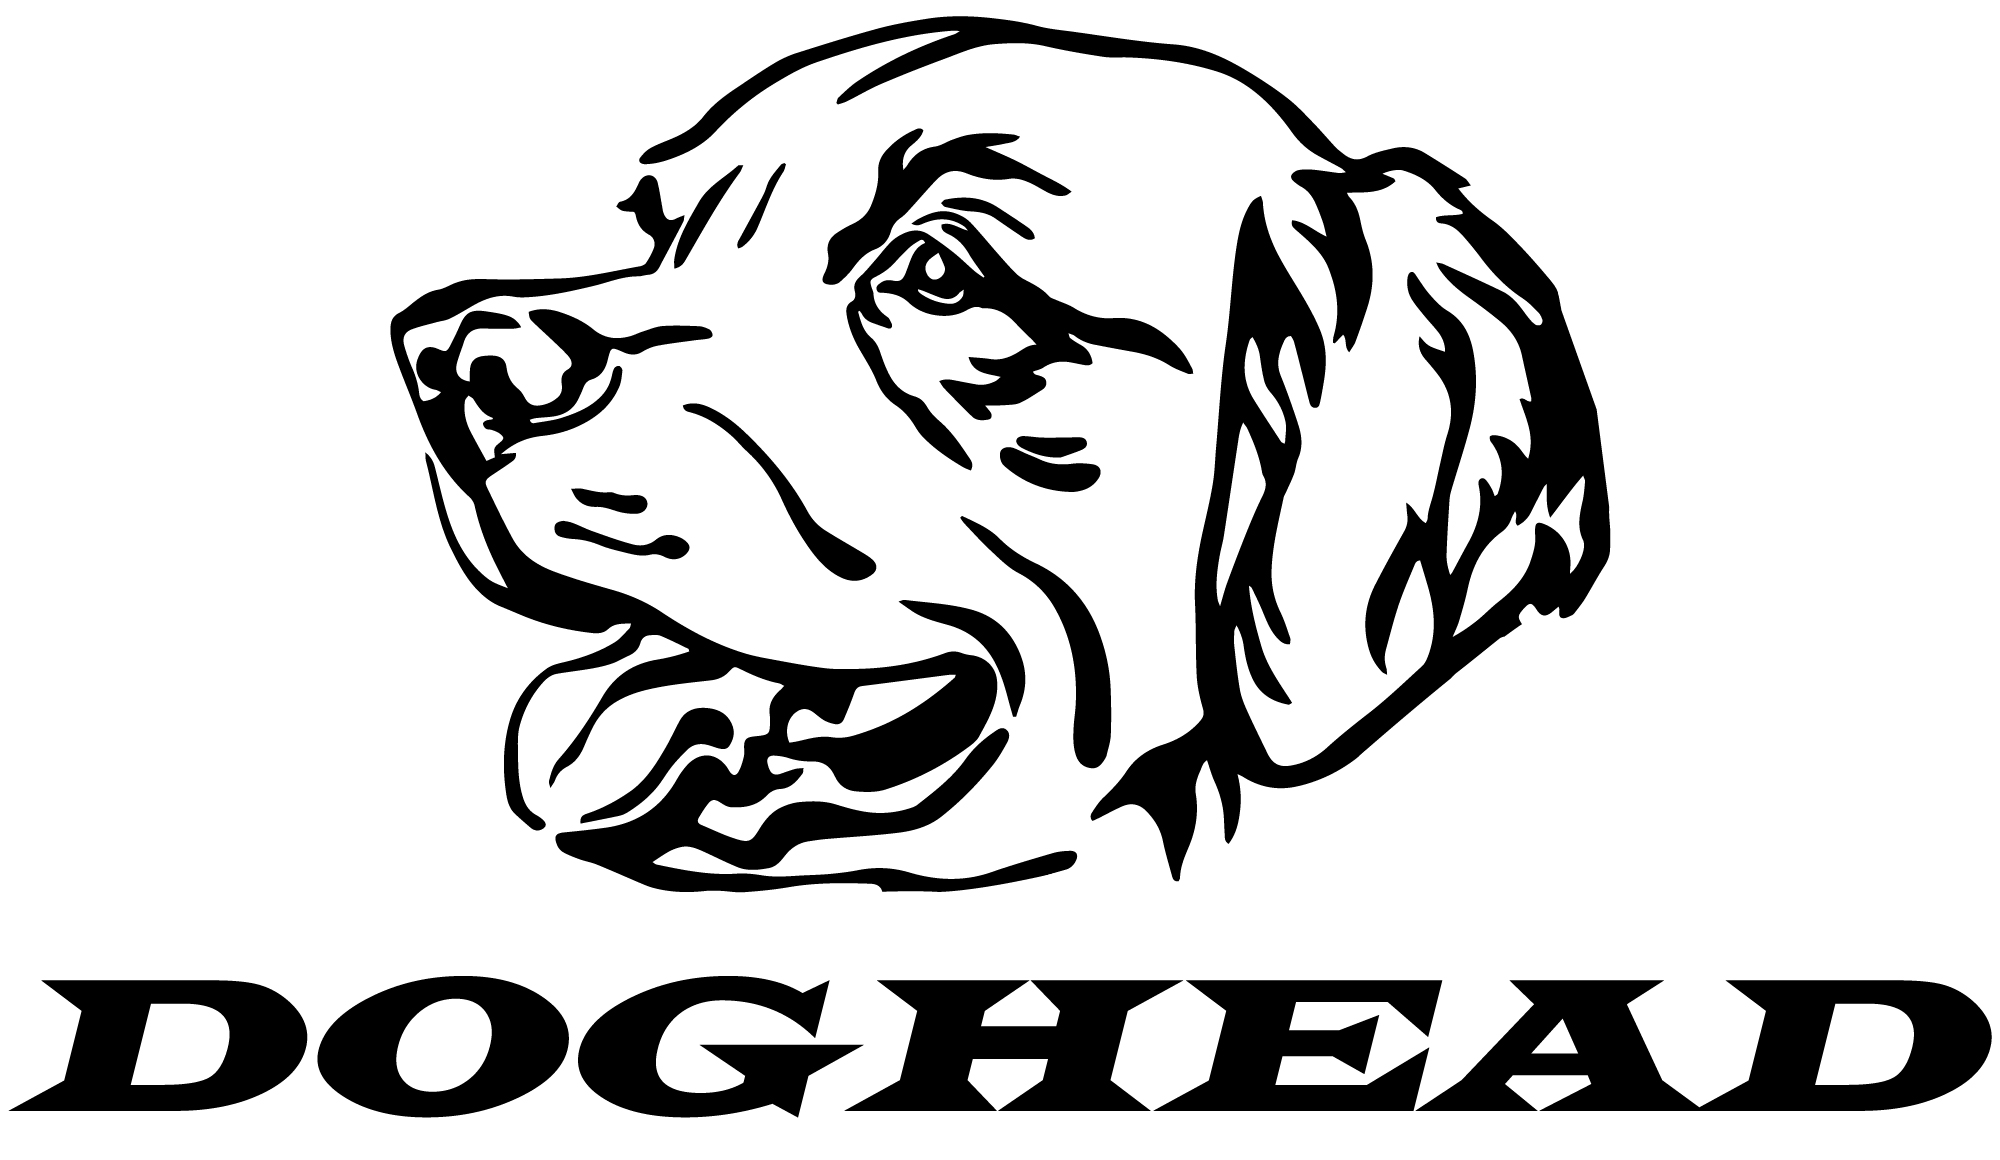 www.doghead.at